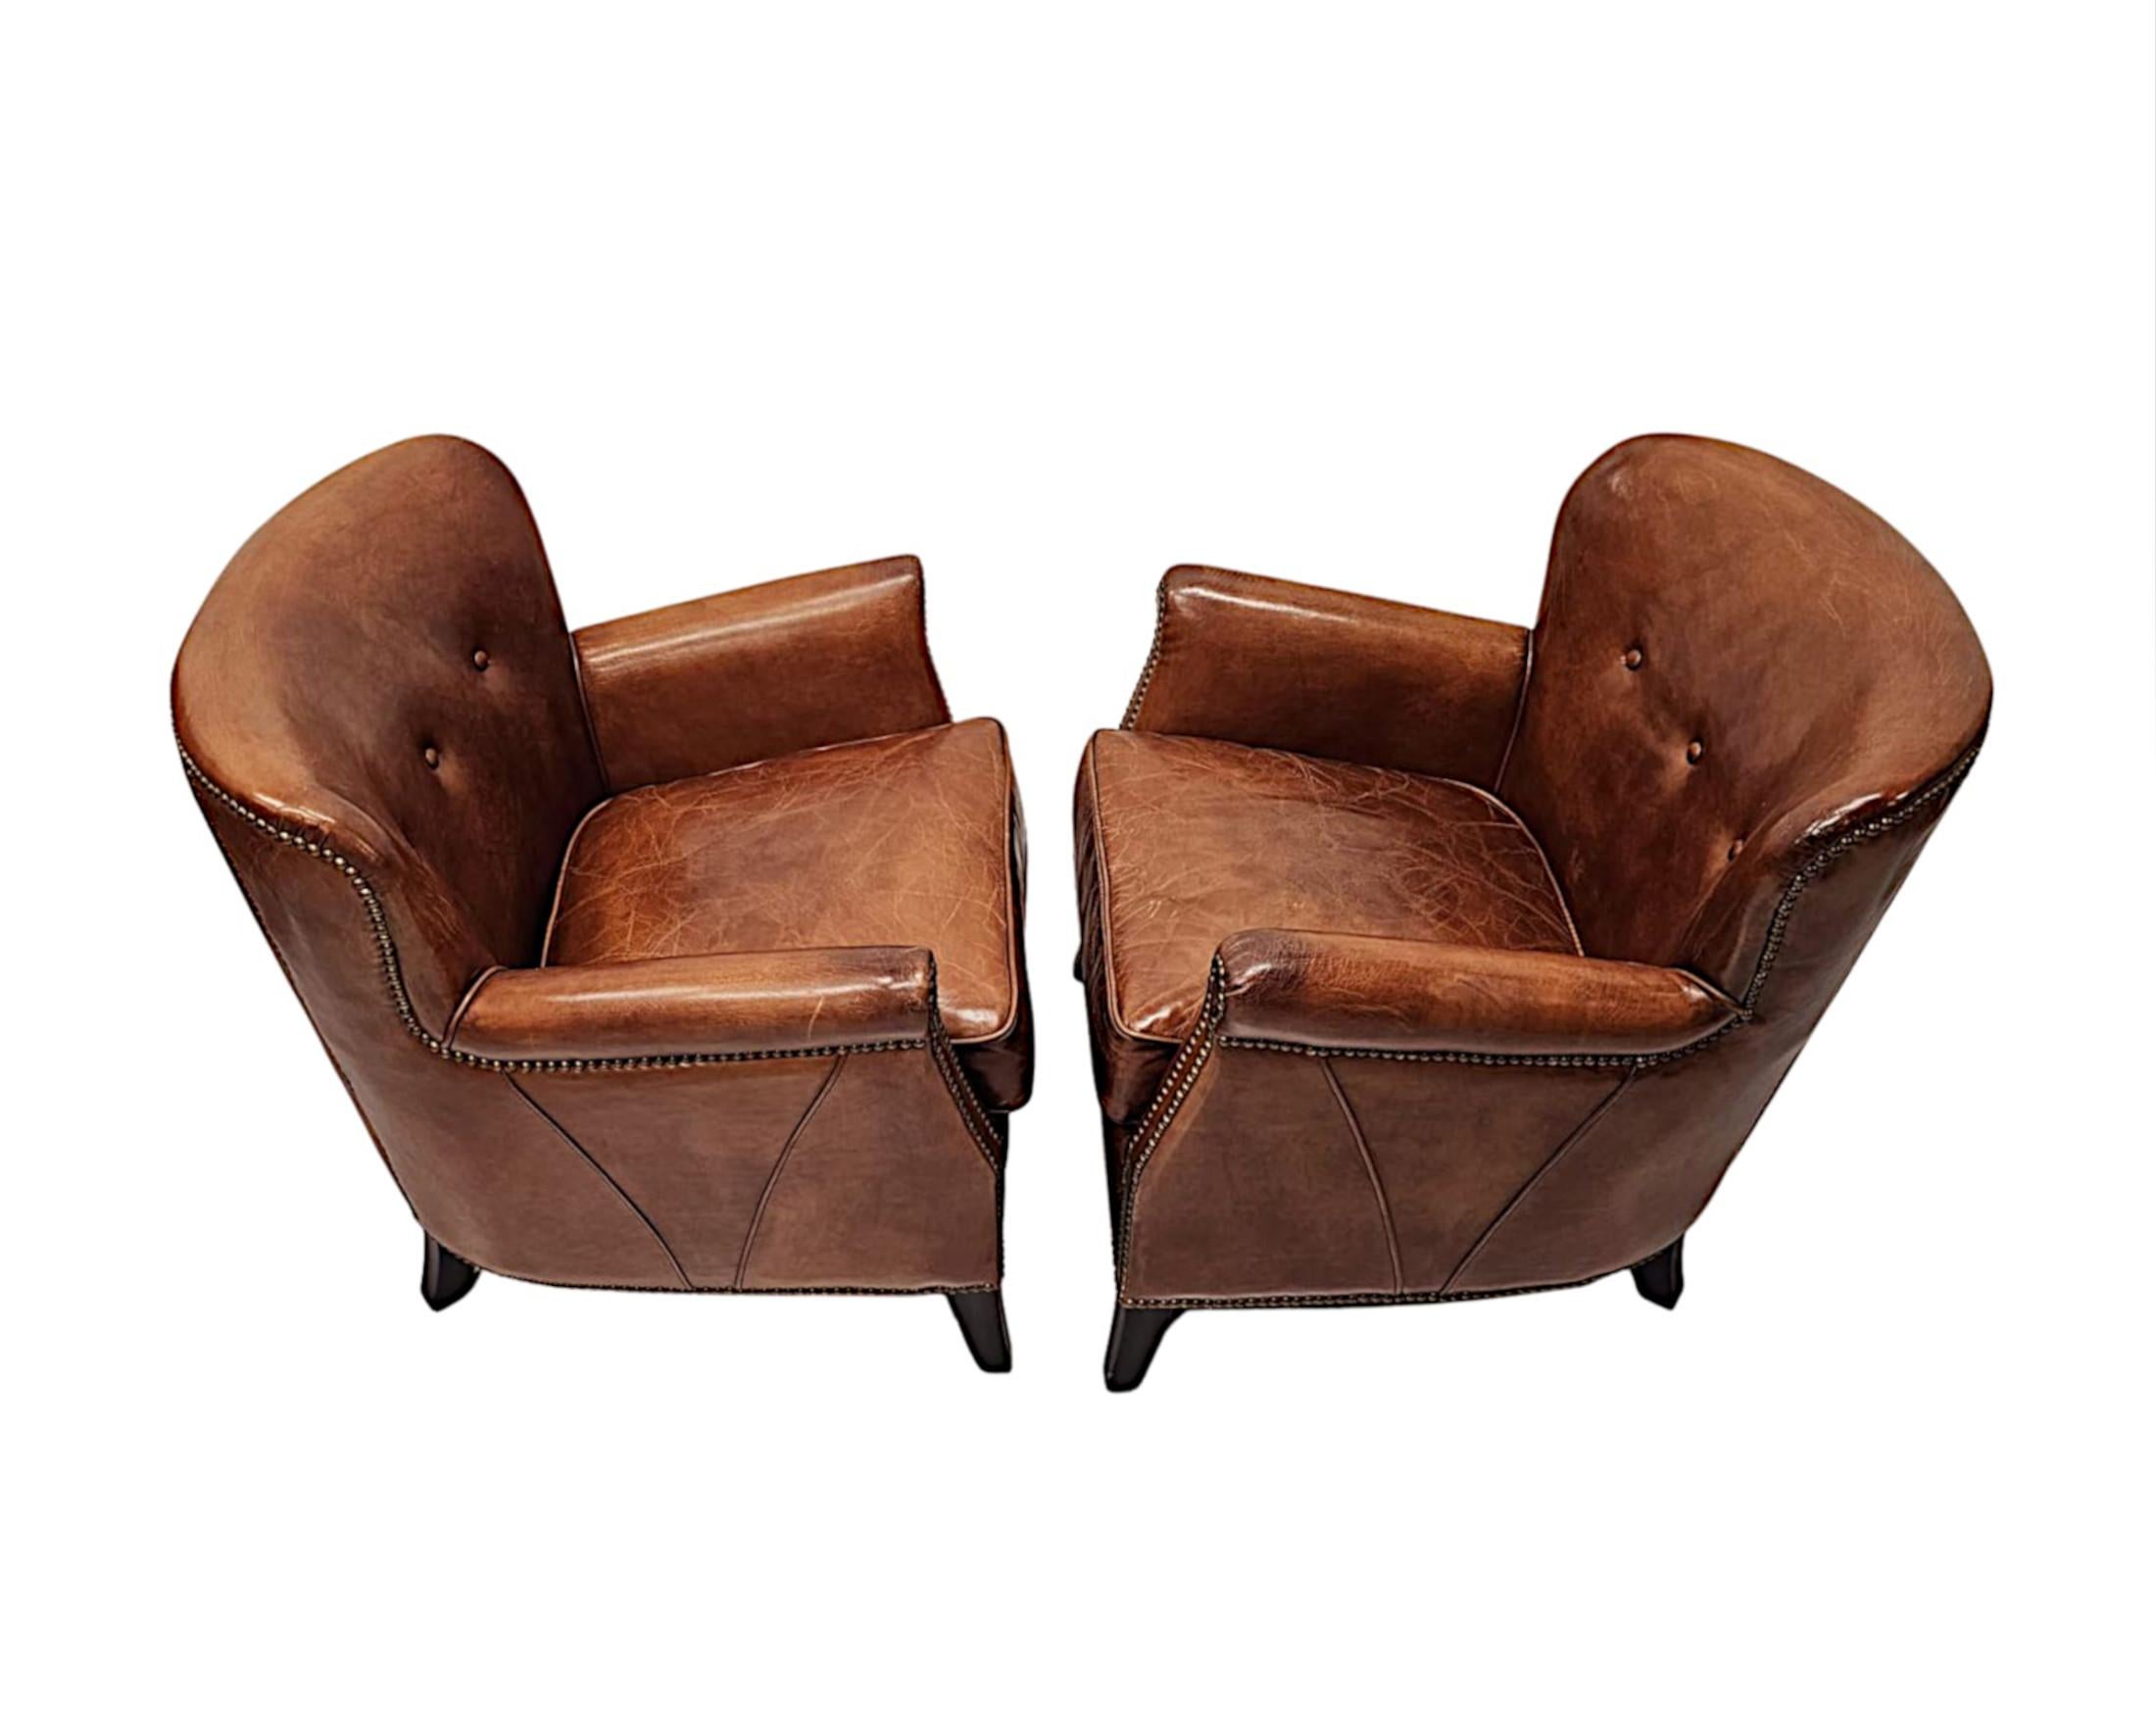 French A Stunning Pair of Small Leather Club Armchairs in the Art Deco Style 